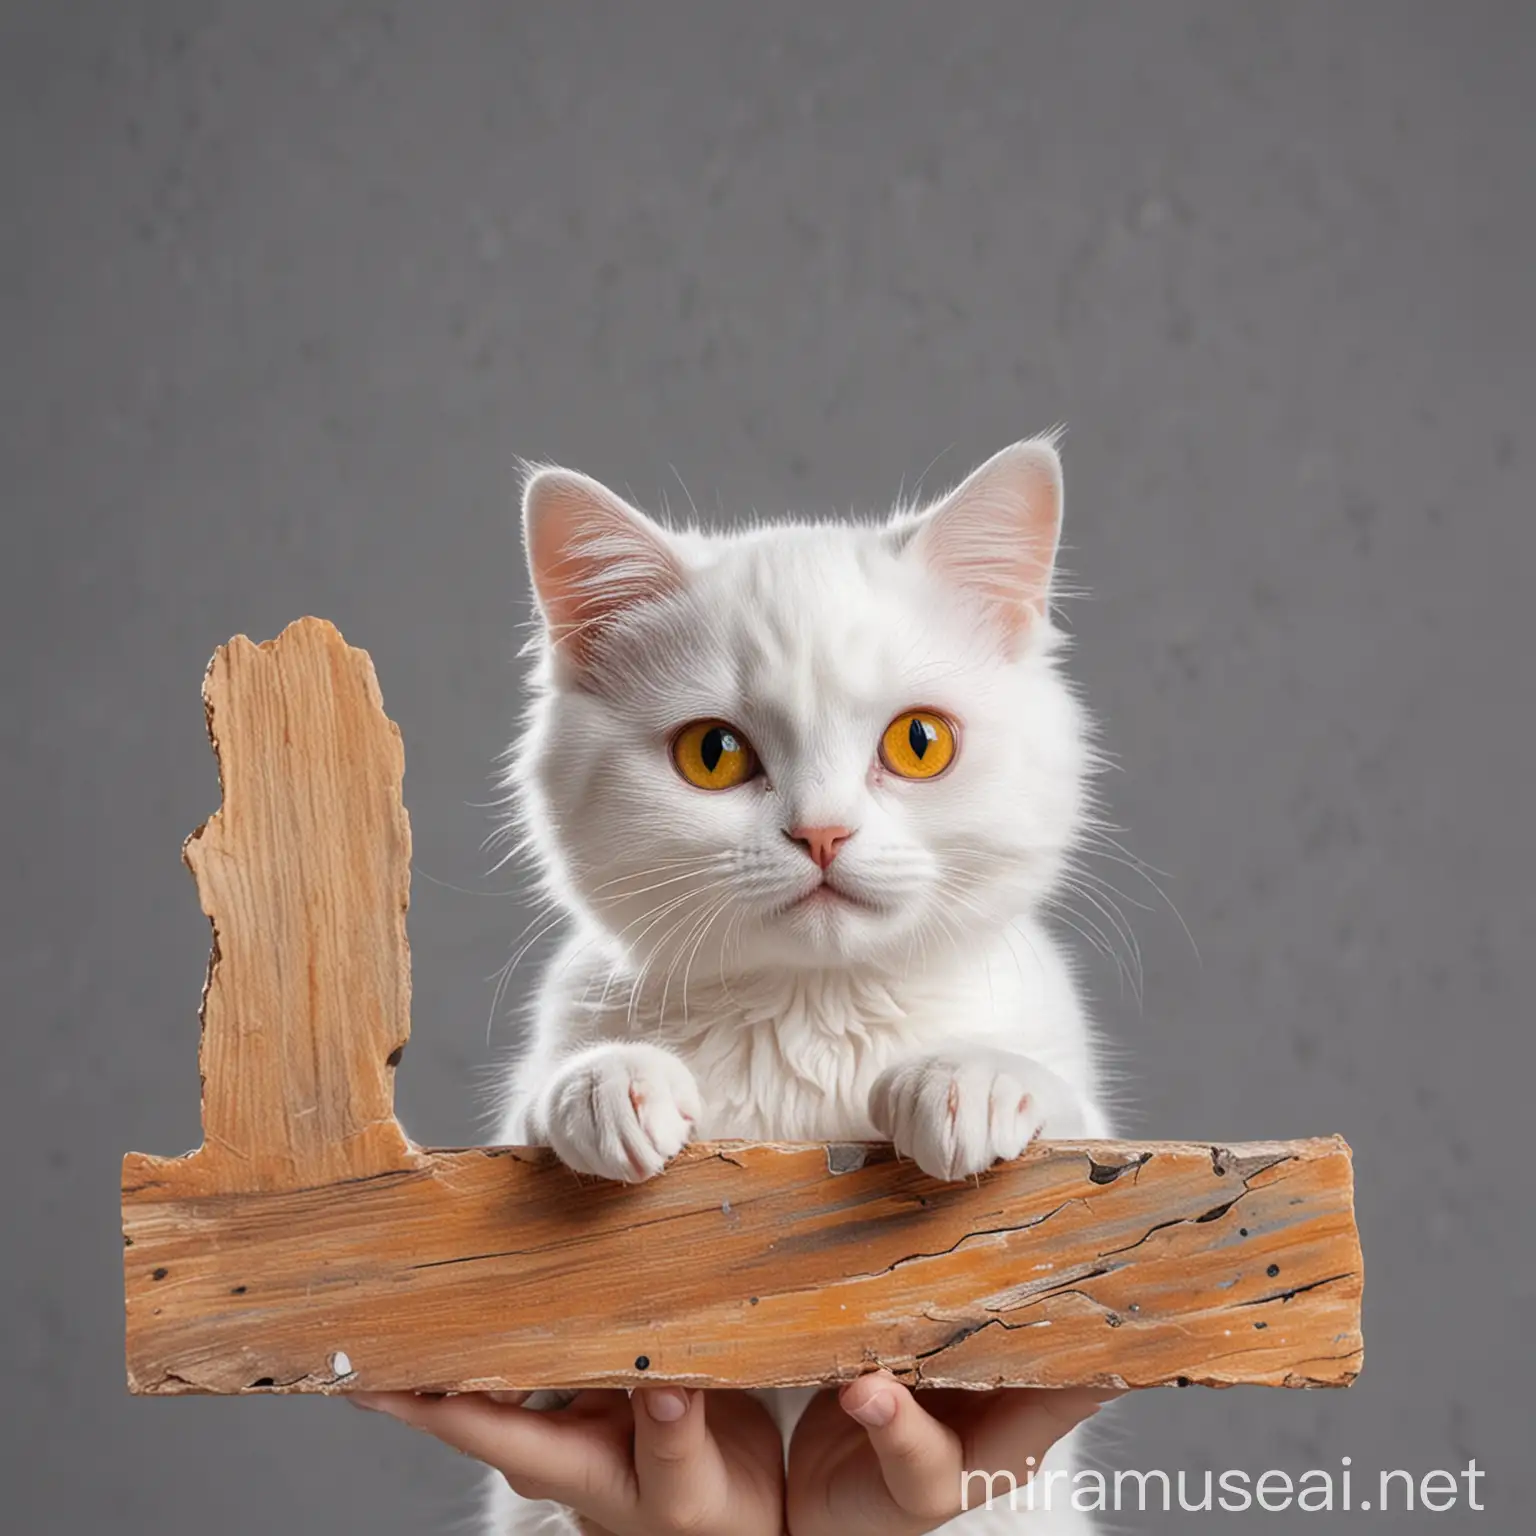 Adorable Small Cat Holding Colorful Slab with Cute Eyes